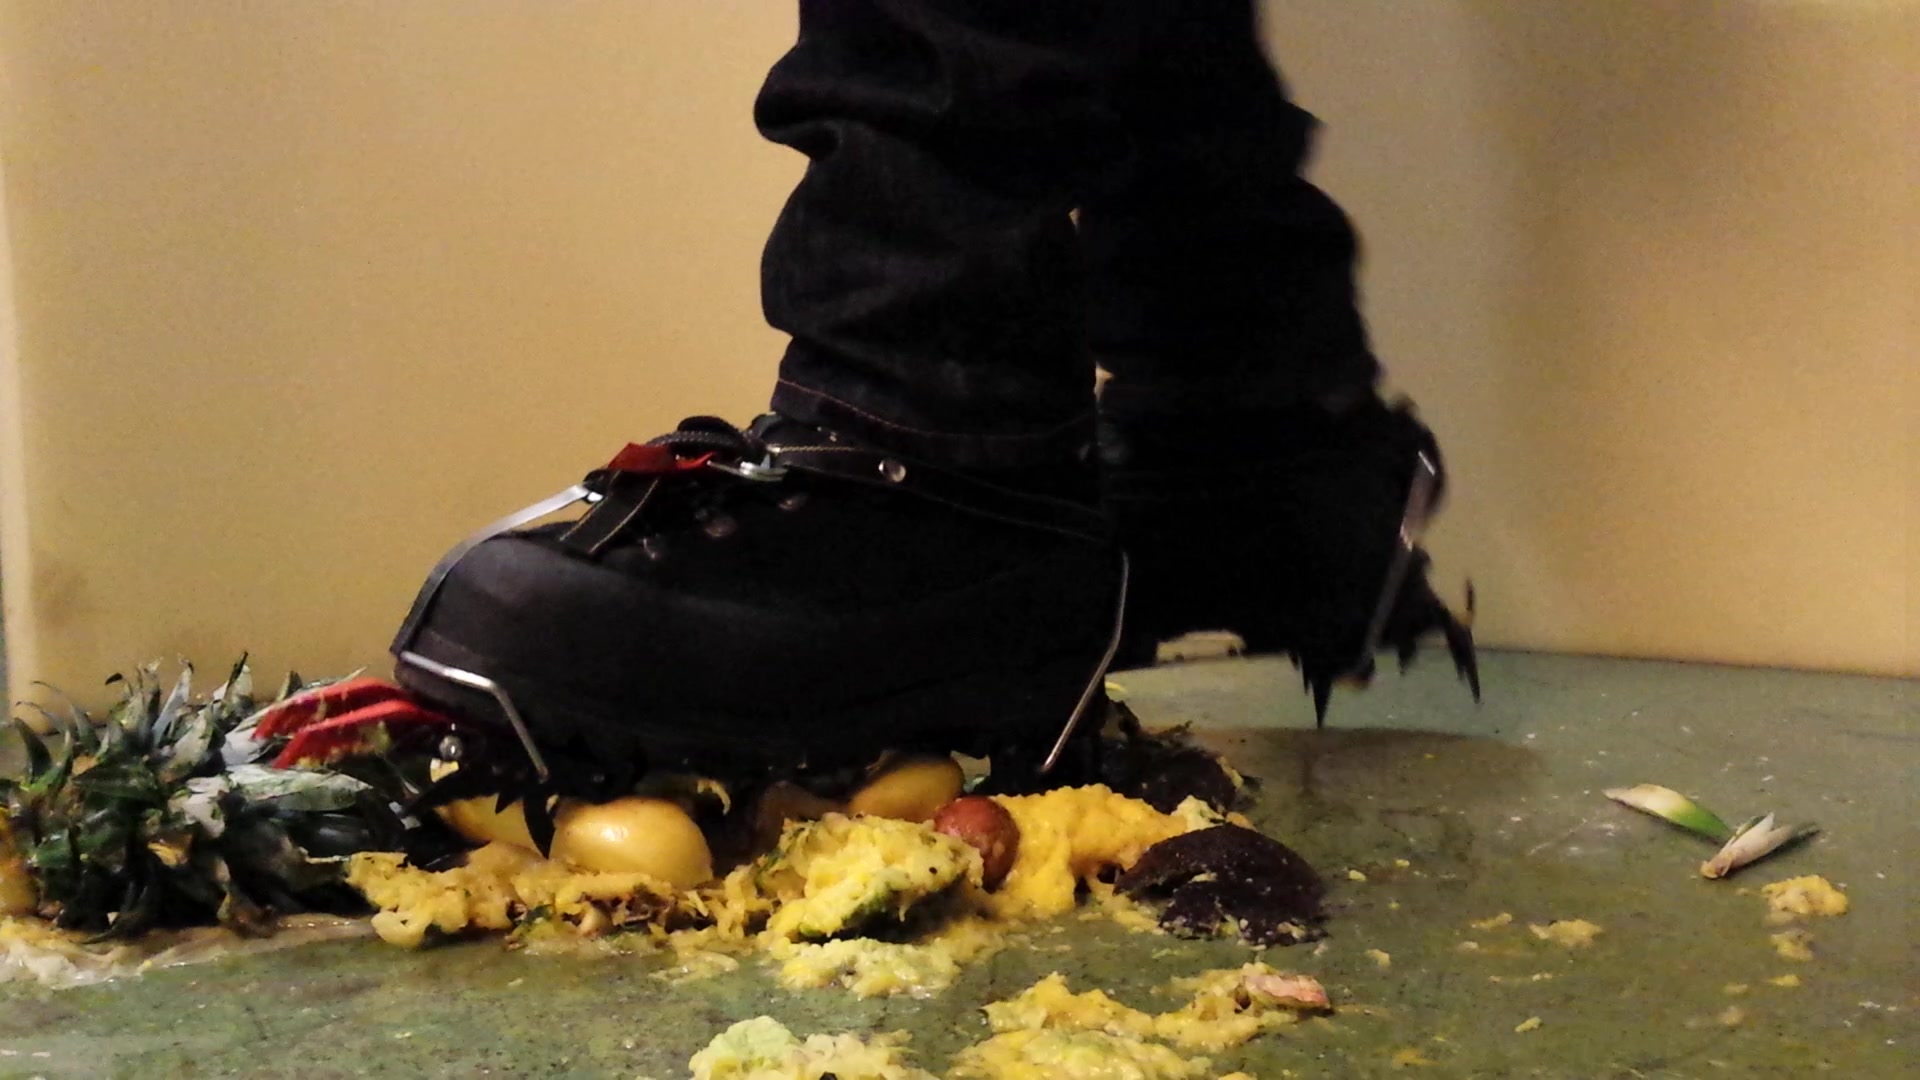 Boots with Crampons crush Food